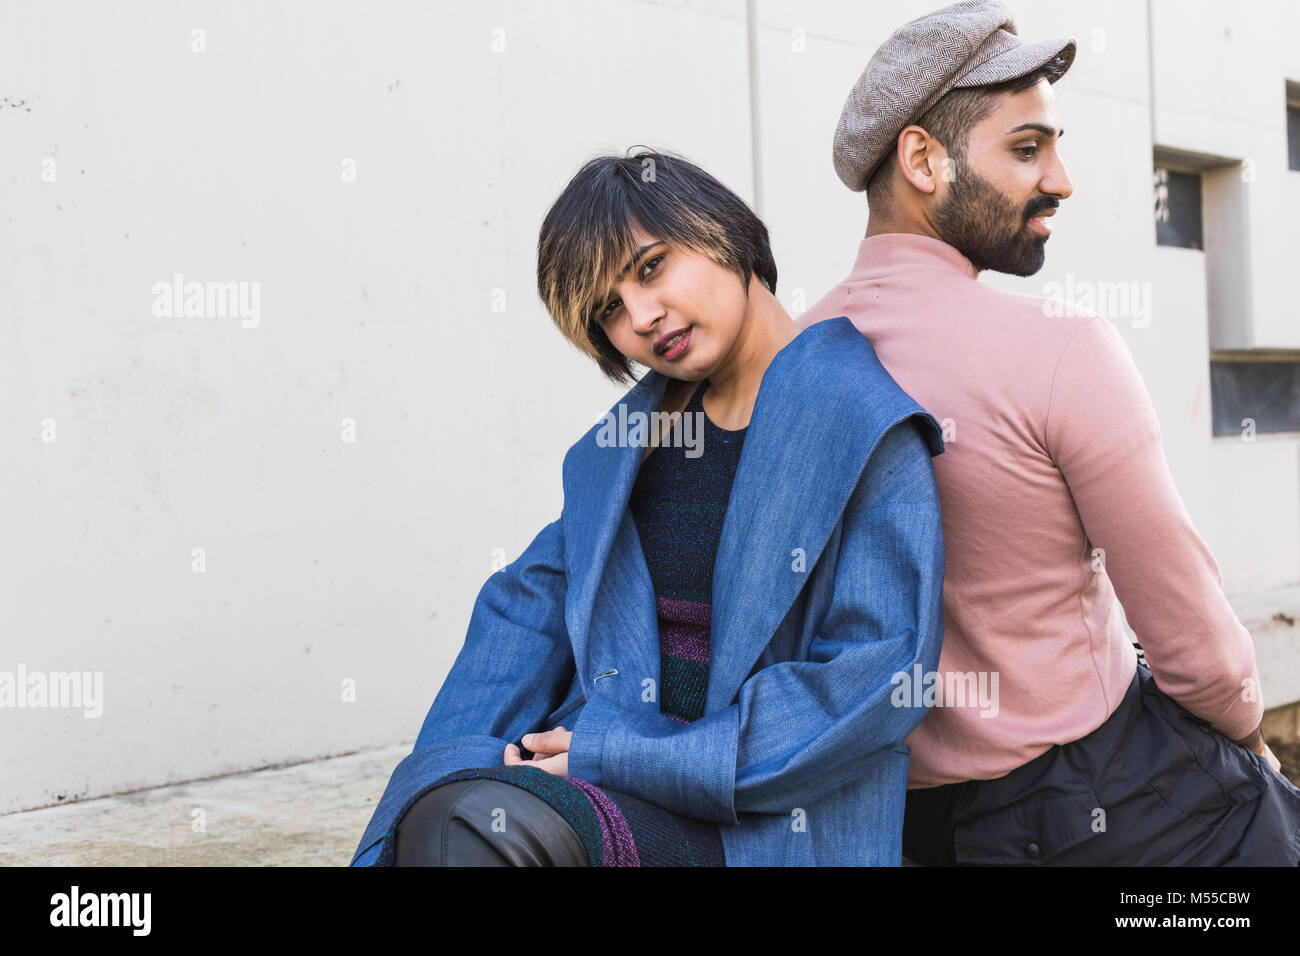 Beautiful Indian couple posing in an urban context. Street fashion and style. Stock Photo